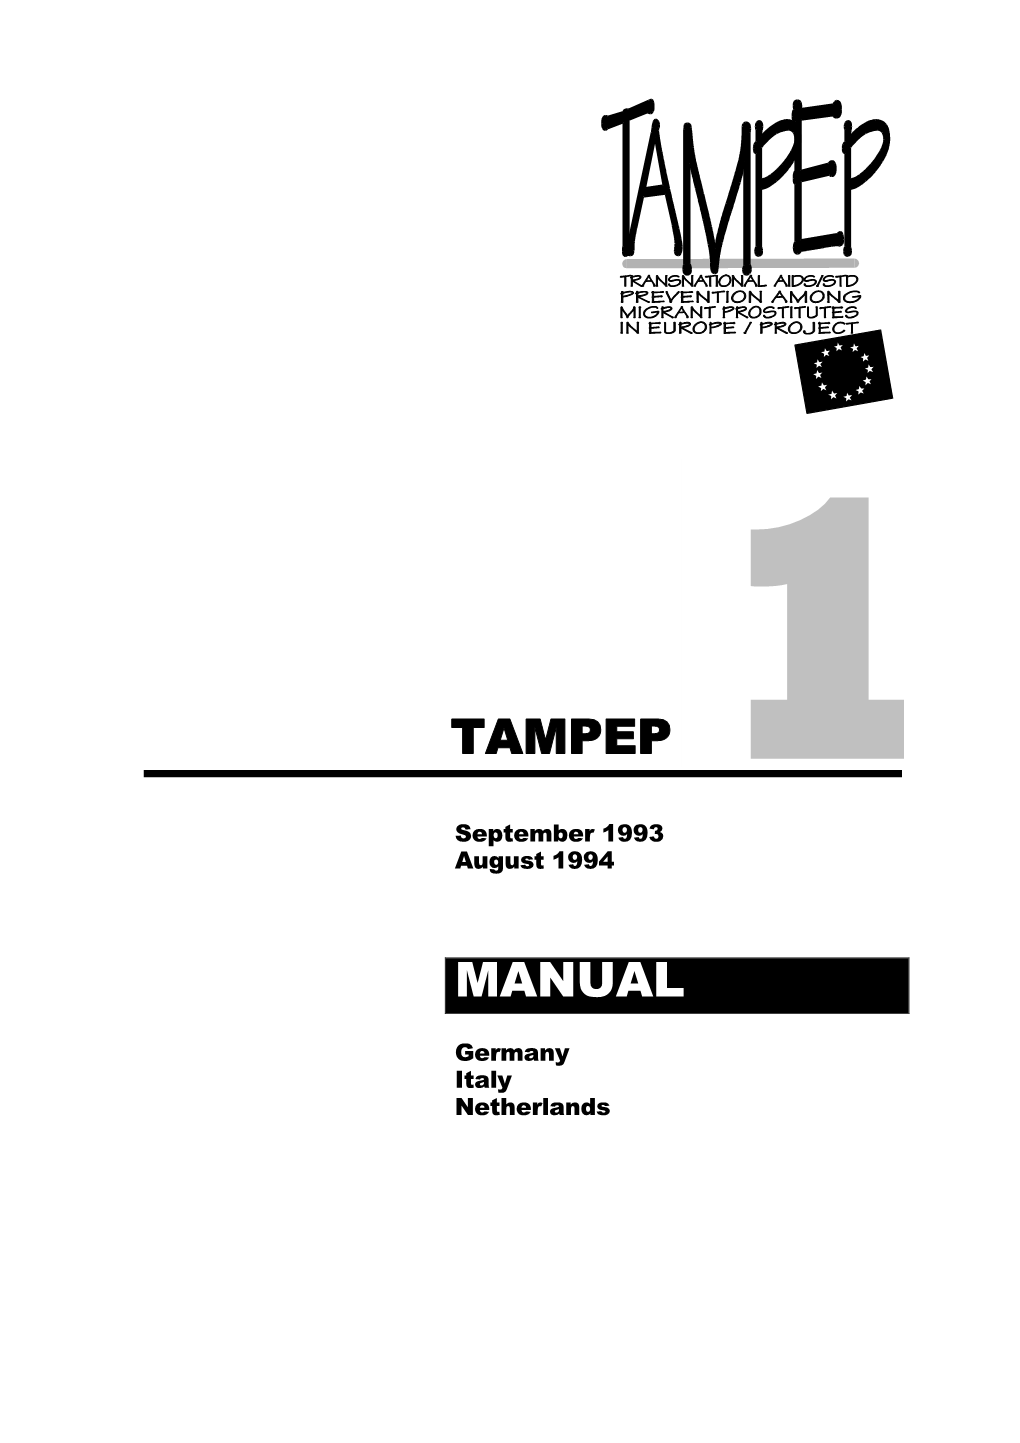 1994: Manual Services for Sex Workers 1994